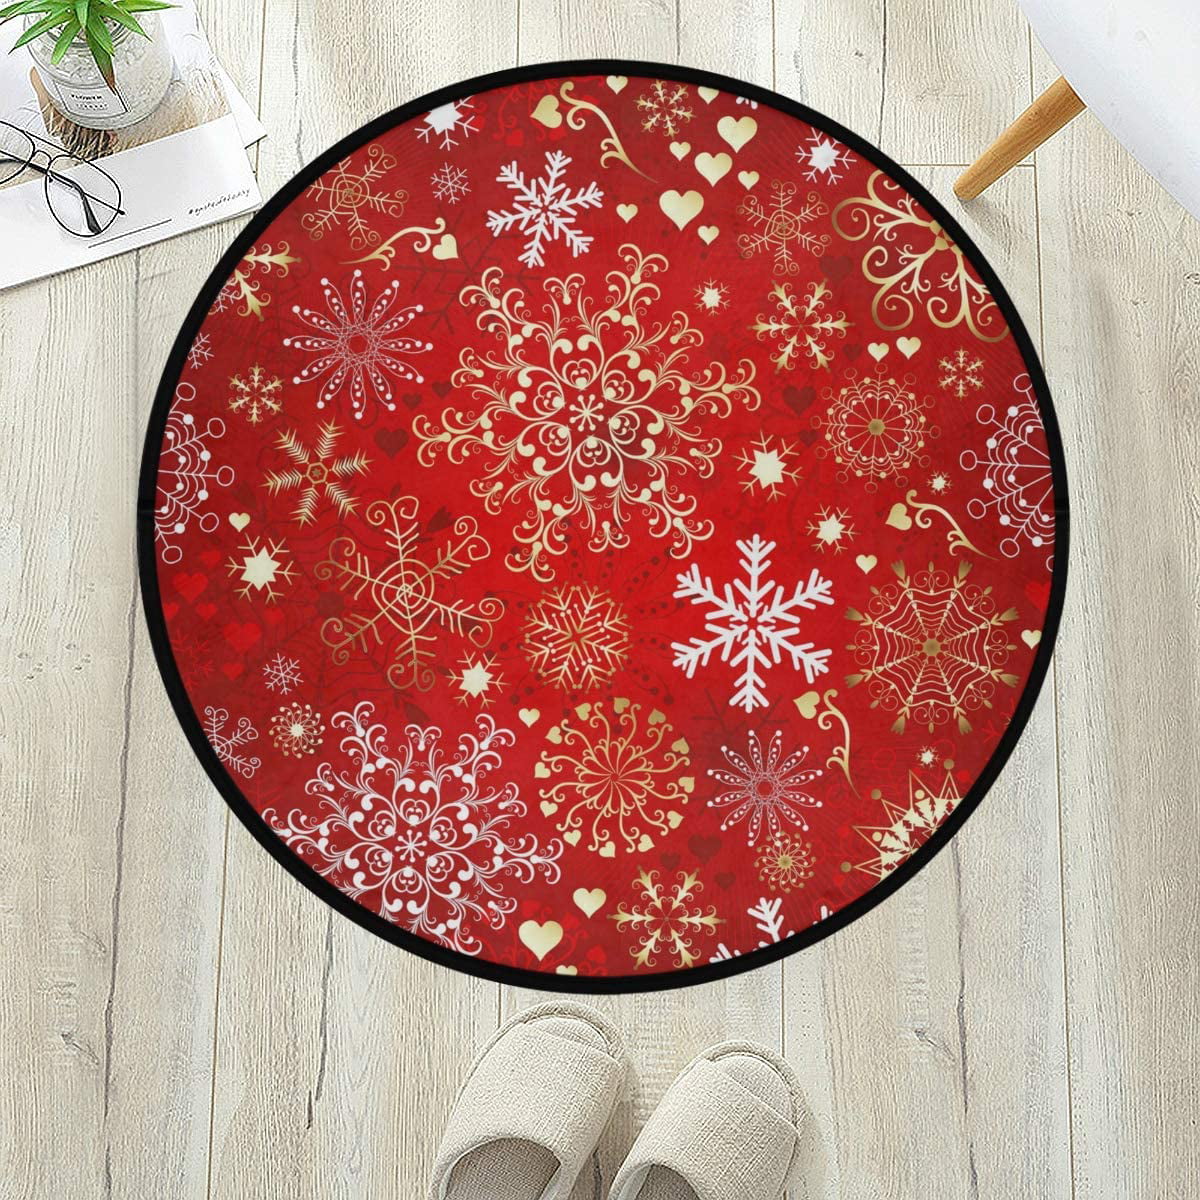 36.2 Inch Round Area Rugs Indoor Ultra Soft Super Water Absorption Comfortable Entrance Mats for Living Room Bedroom Kid's Room Nursery Kitchen Red Maple Leaves 